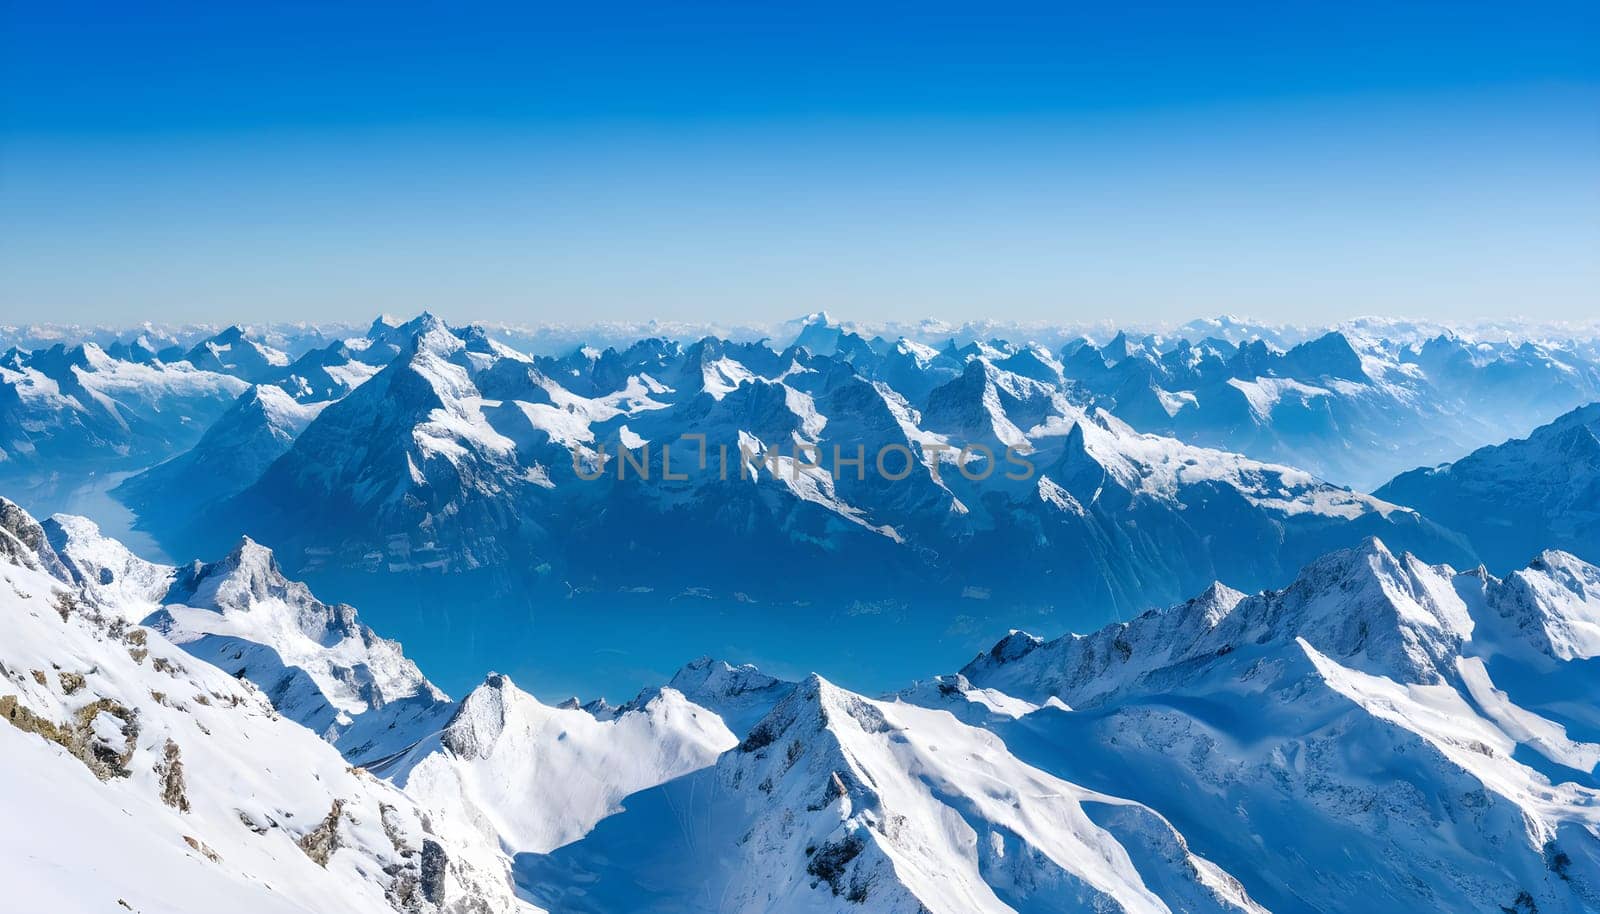 Snowy Panorama: Spectacular Views of the Alps